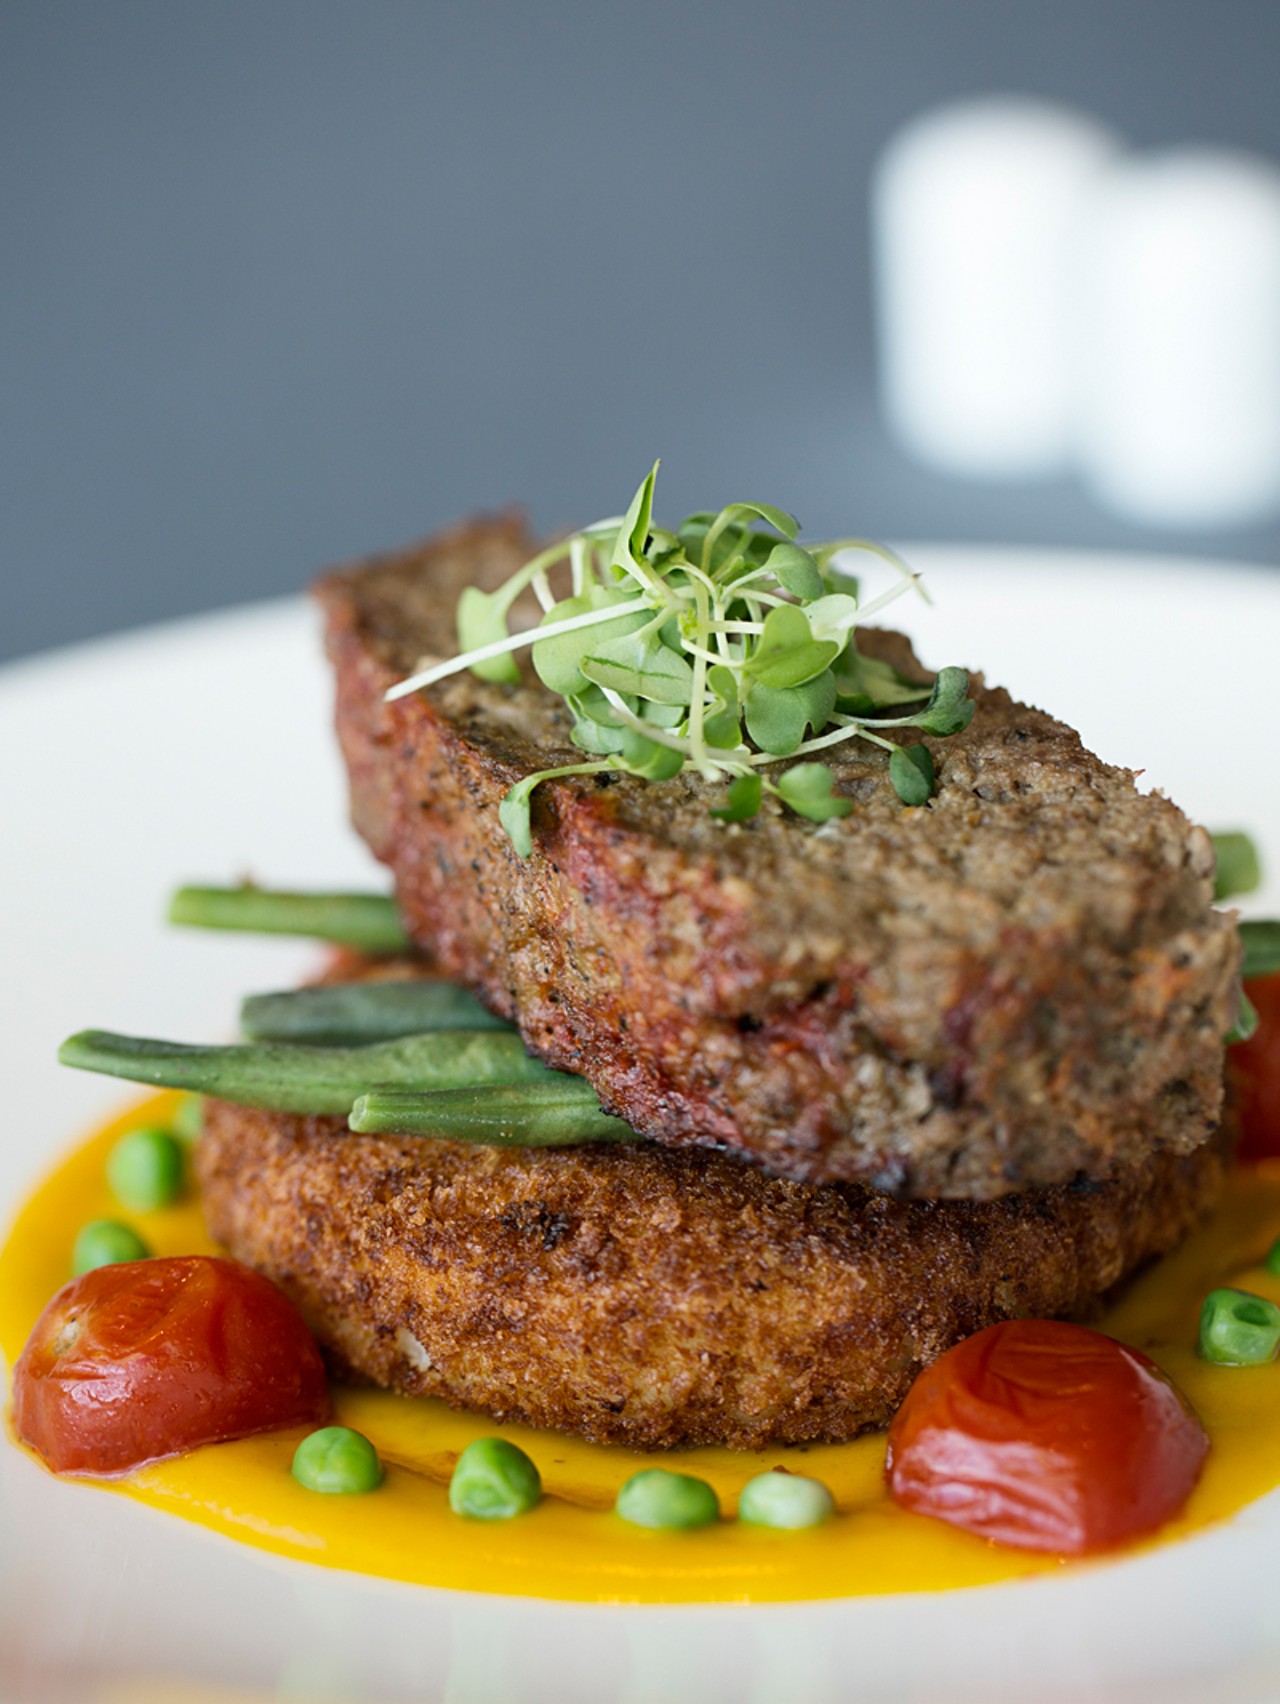 The meatloaf is made with local grass-fed beef and comes with horseradish potato cake, string beans and onions, and roasted carrot coulis.